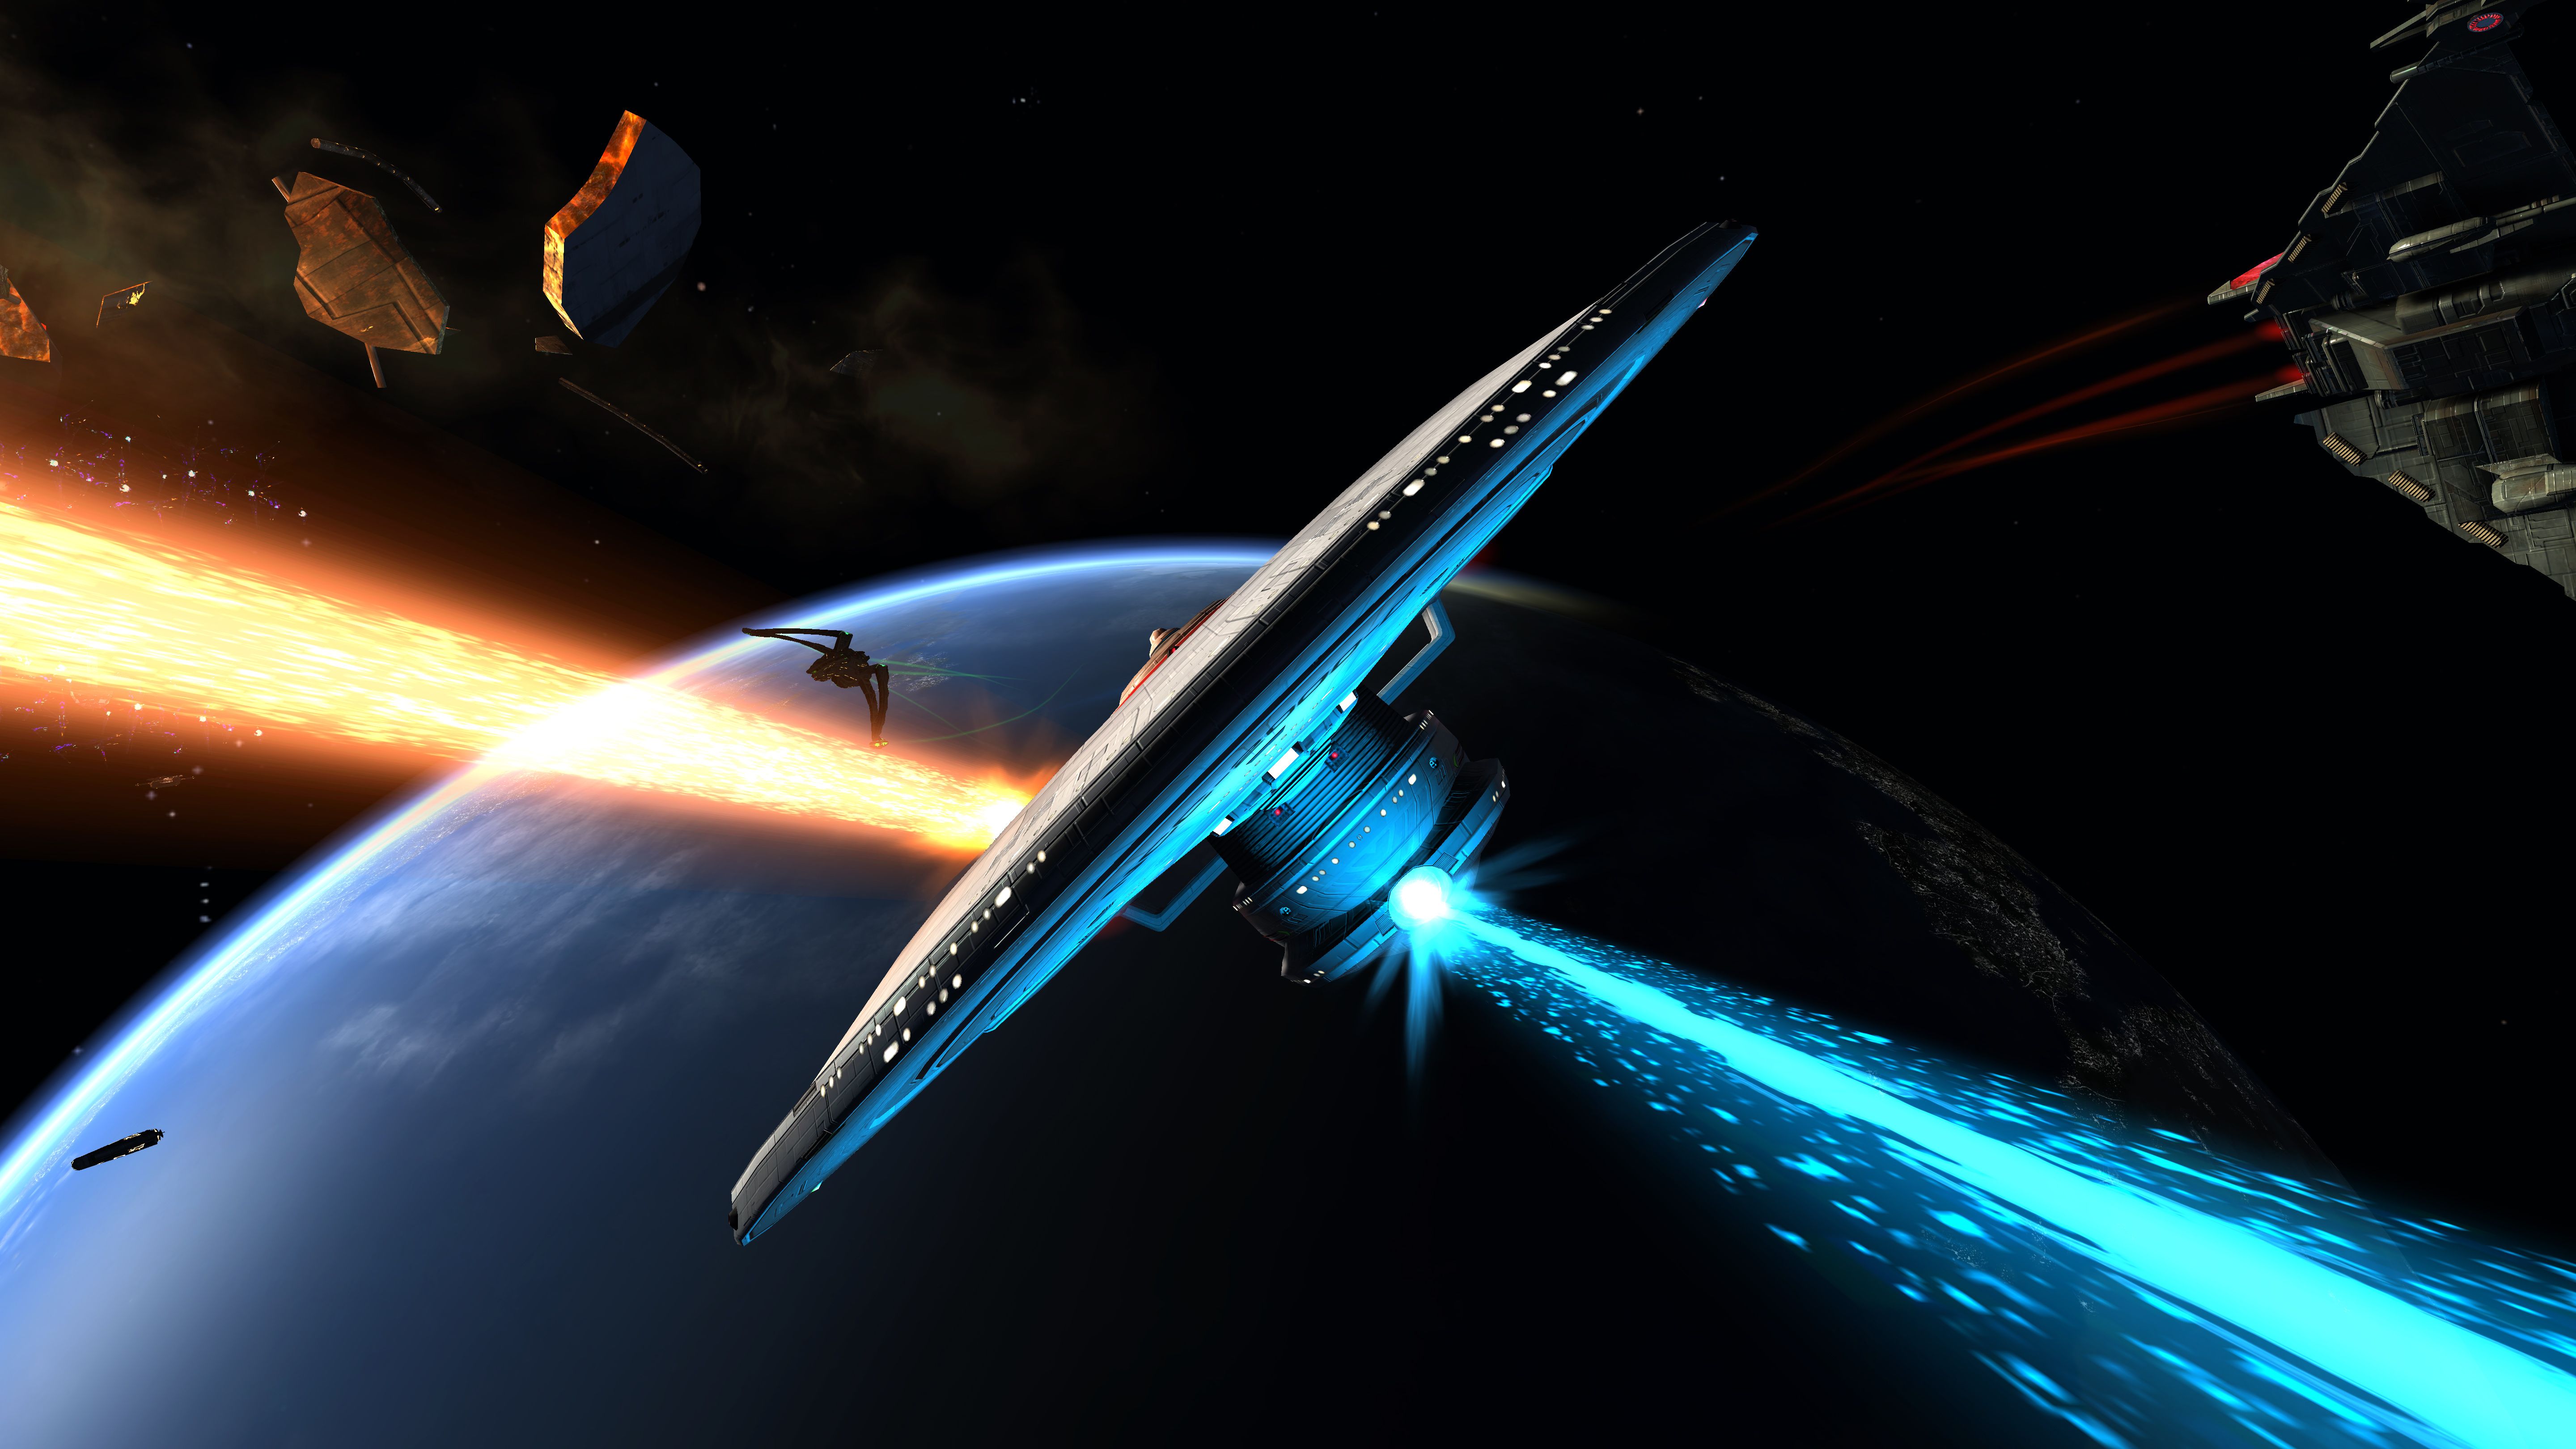 Free download Star Trek Online Wallpaper Picture to pin [5760x3240] for your Desktop, Mobile & Tablet. Explore Star Trek Online Wallpaper. Star Trek Wallpaper, Star Trek Desktop Wallpaper, Star